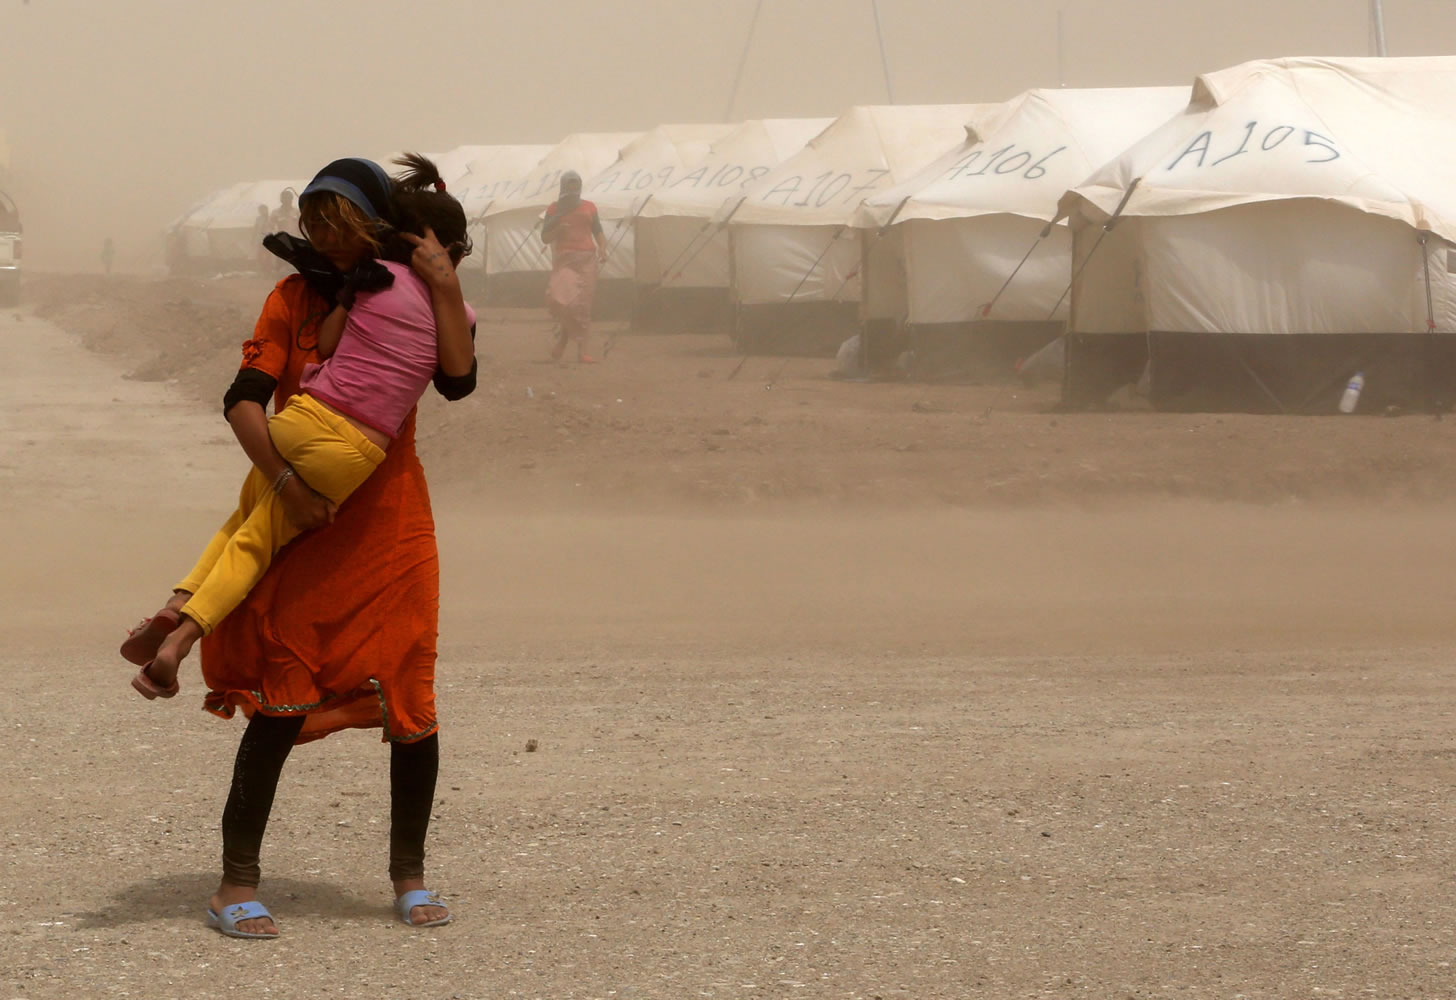 An internally displaced Iraqi woman holds her sister during a sandstorm at a new camp outside the Bajid Kandala camp in Feeshkhabour town, Iraq, Tuesday, Aug. 19, 2014. Some 1.5 million people have been displaced by fighting in Iraq since the Islamic State's rapid advance began in June, and thousands more have died. The scale of the humanitarian crisis prompted the U.N. to declare its highest level of emergency last week.